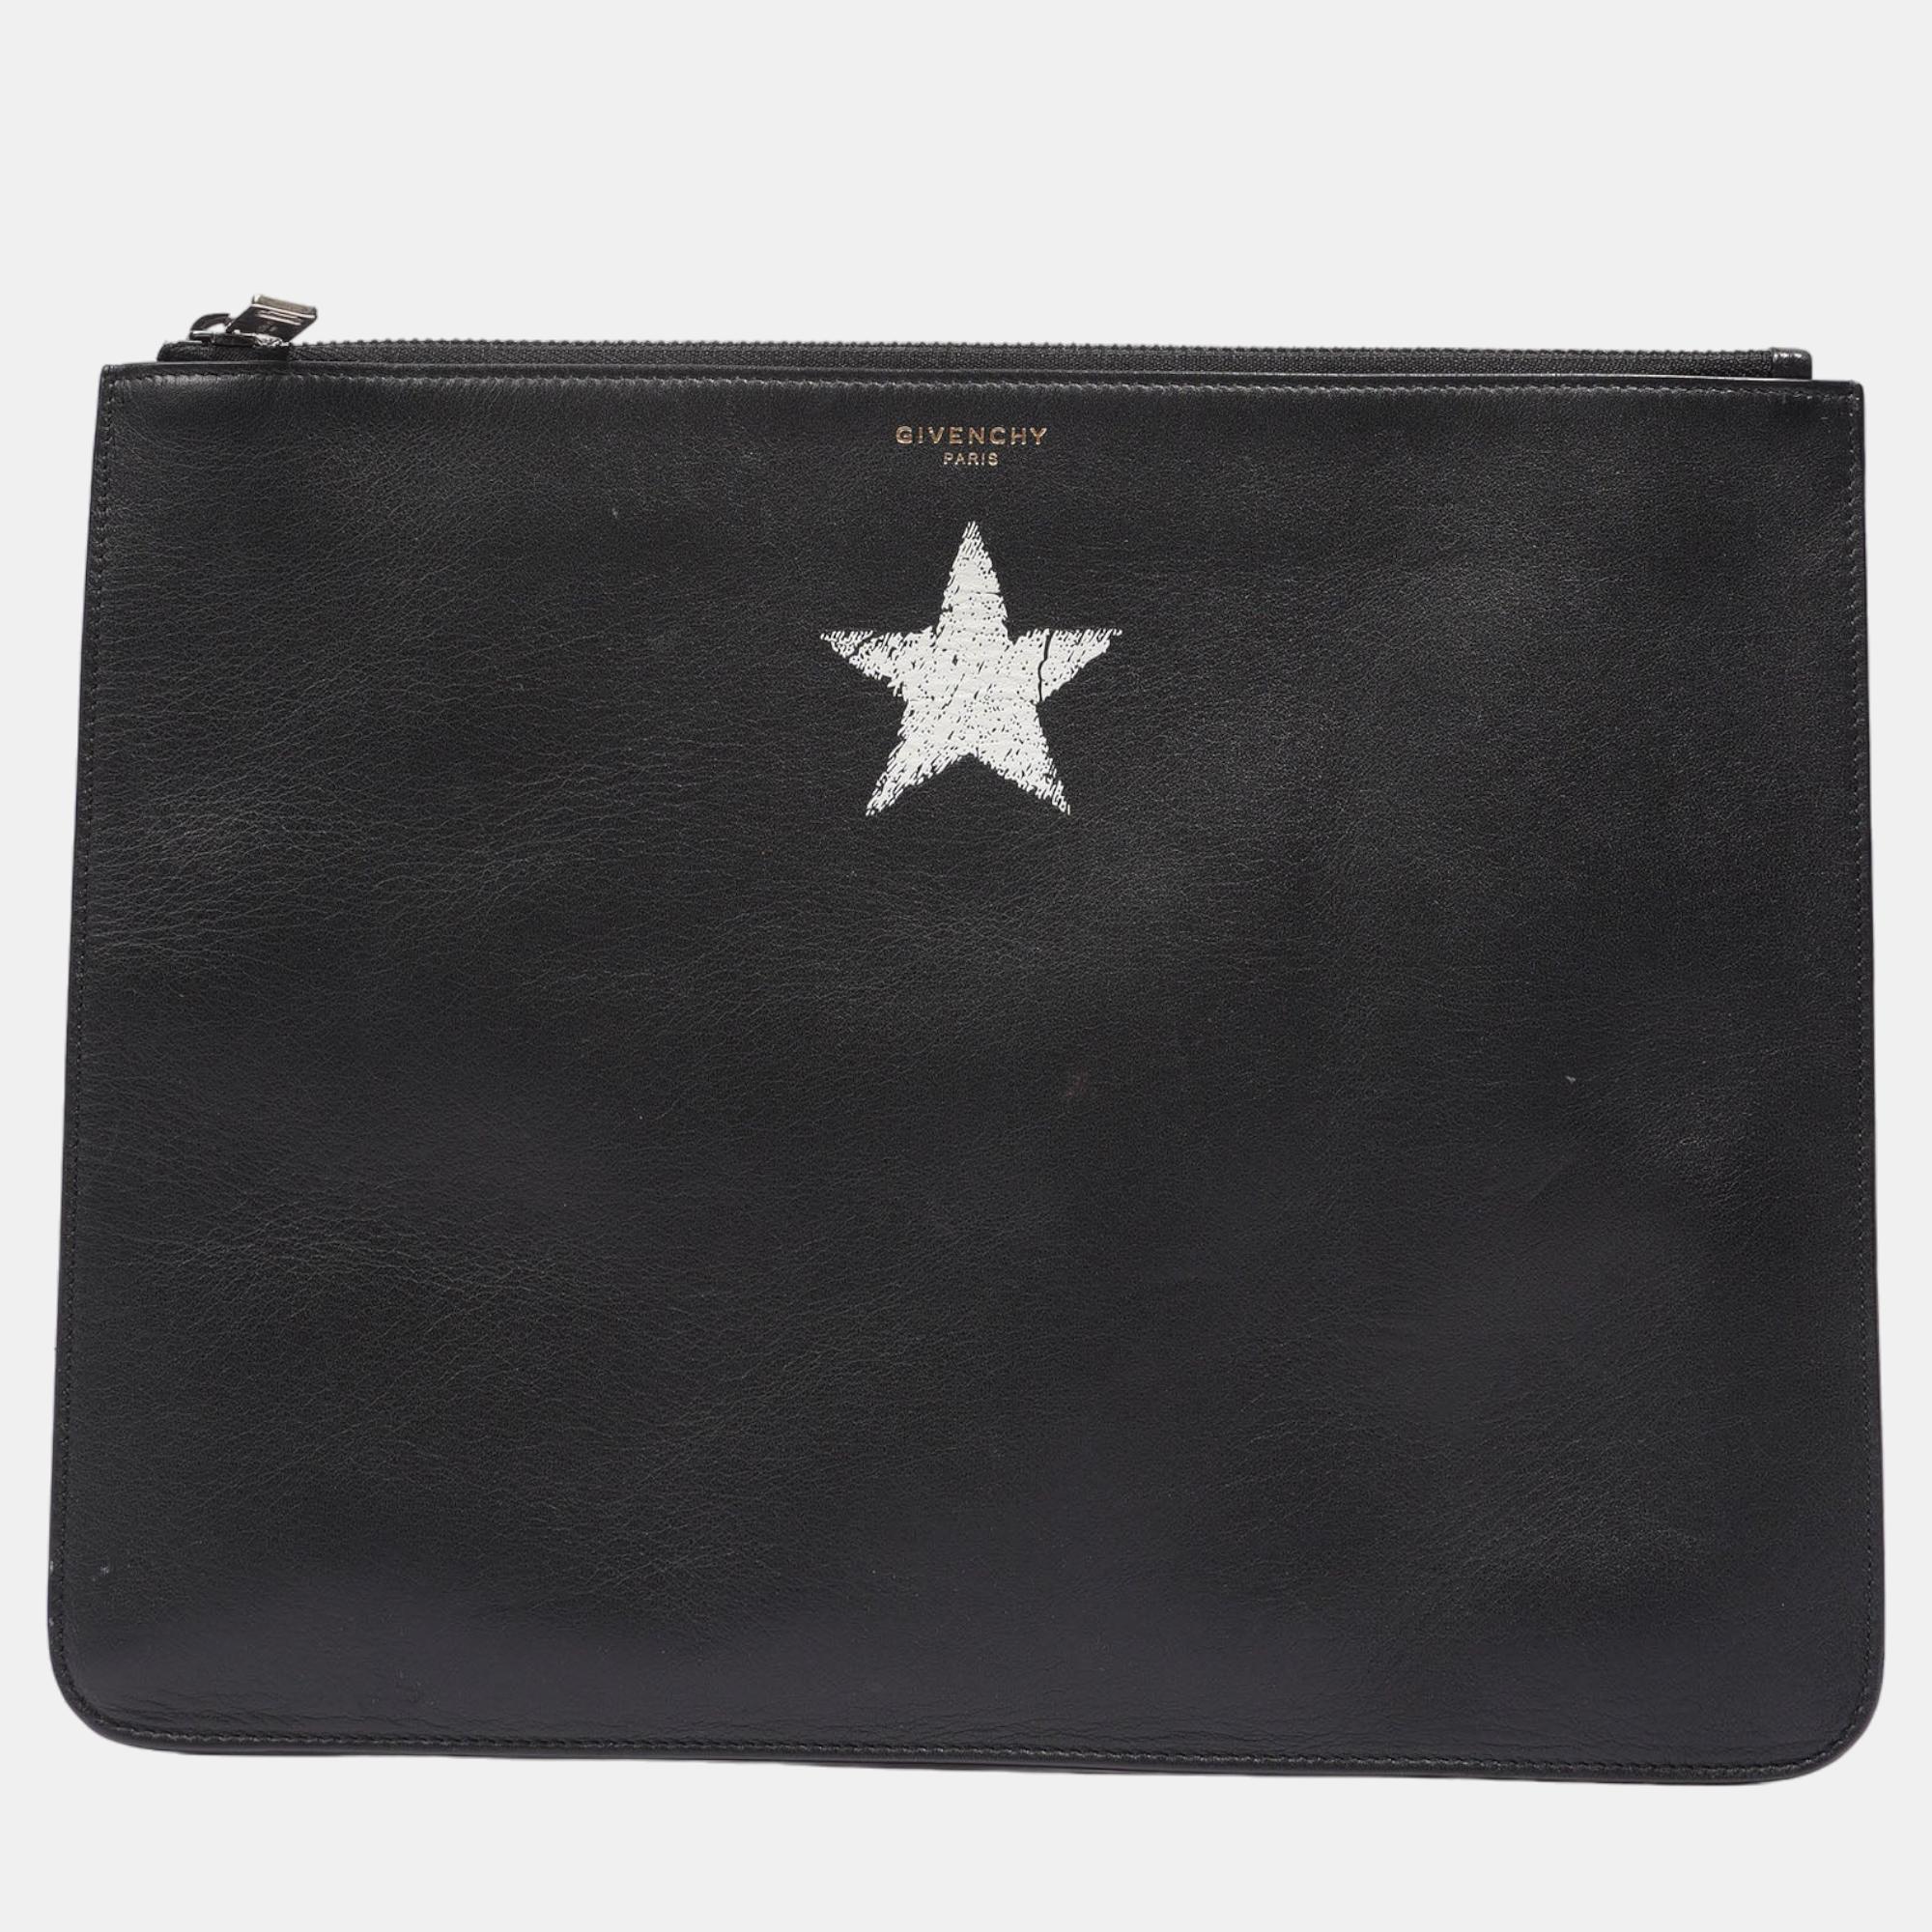 Givenchy Star Clutch Black Leather